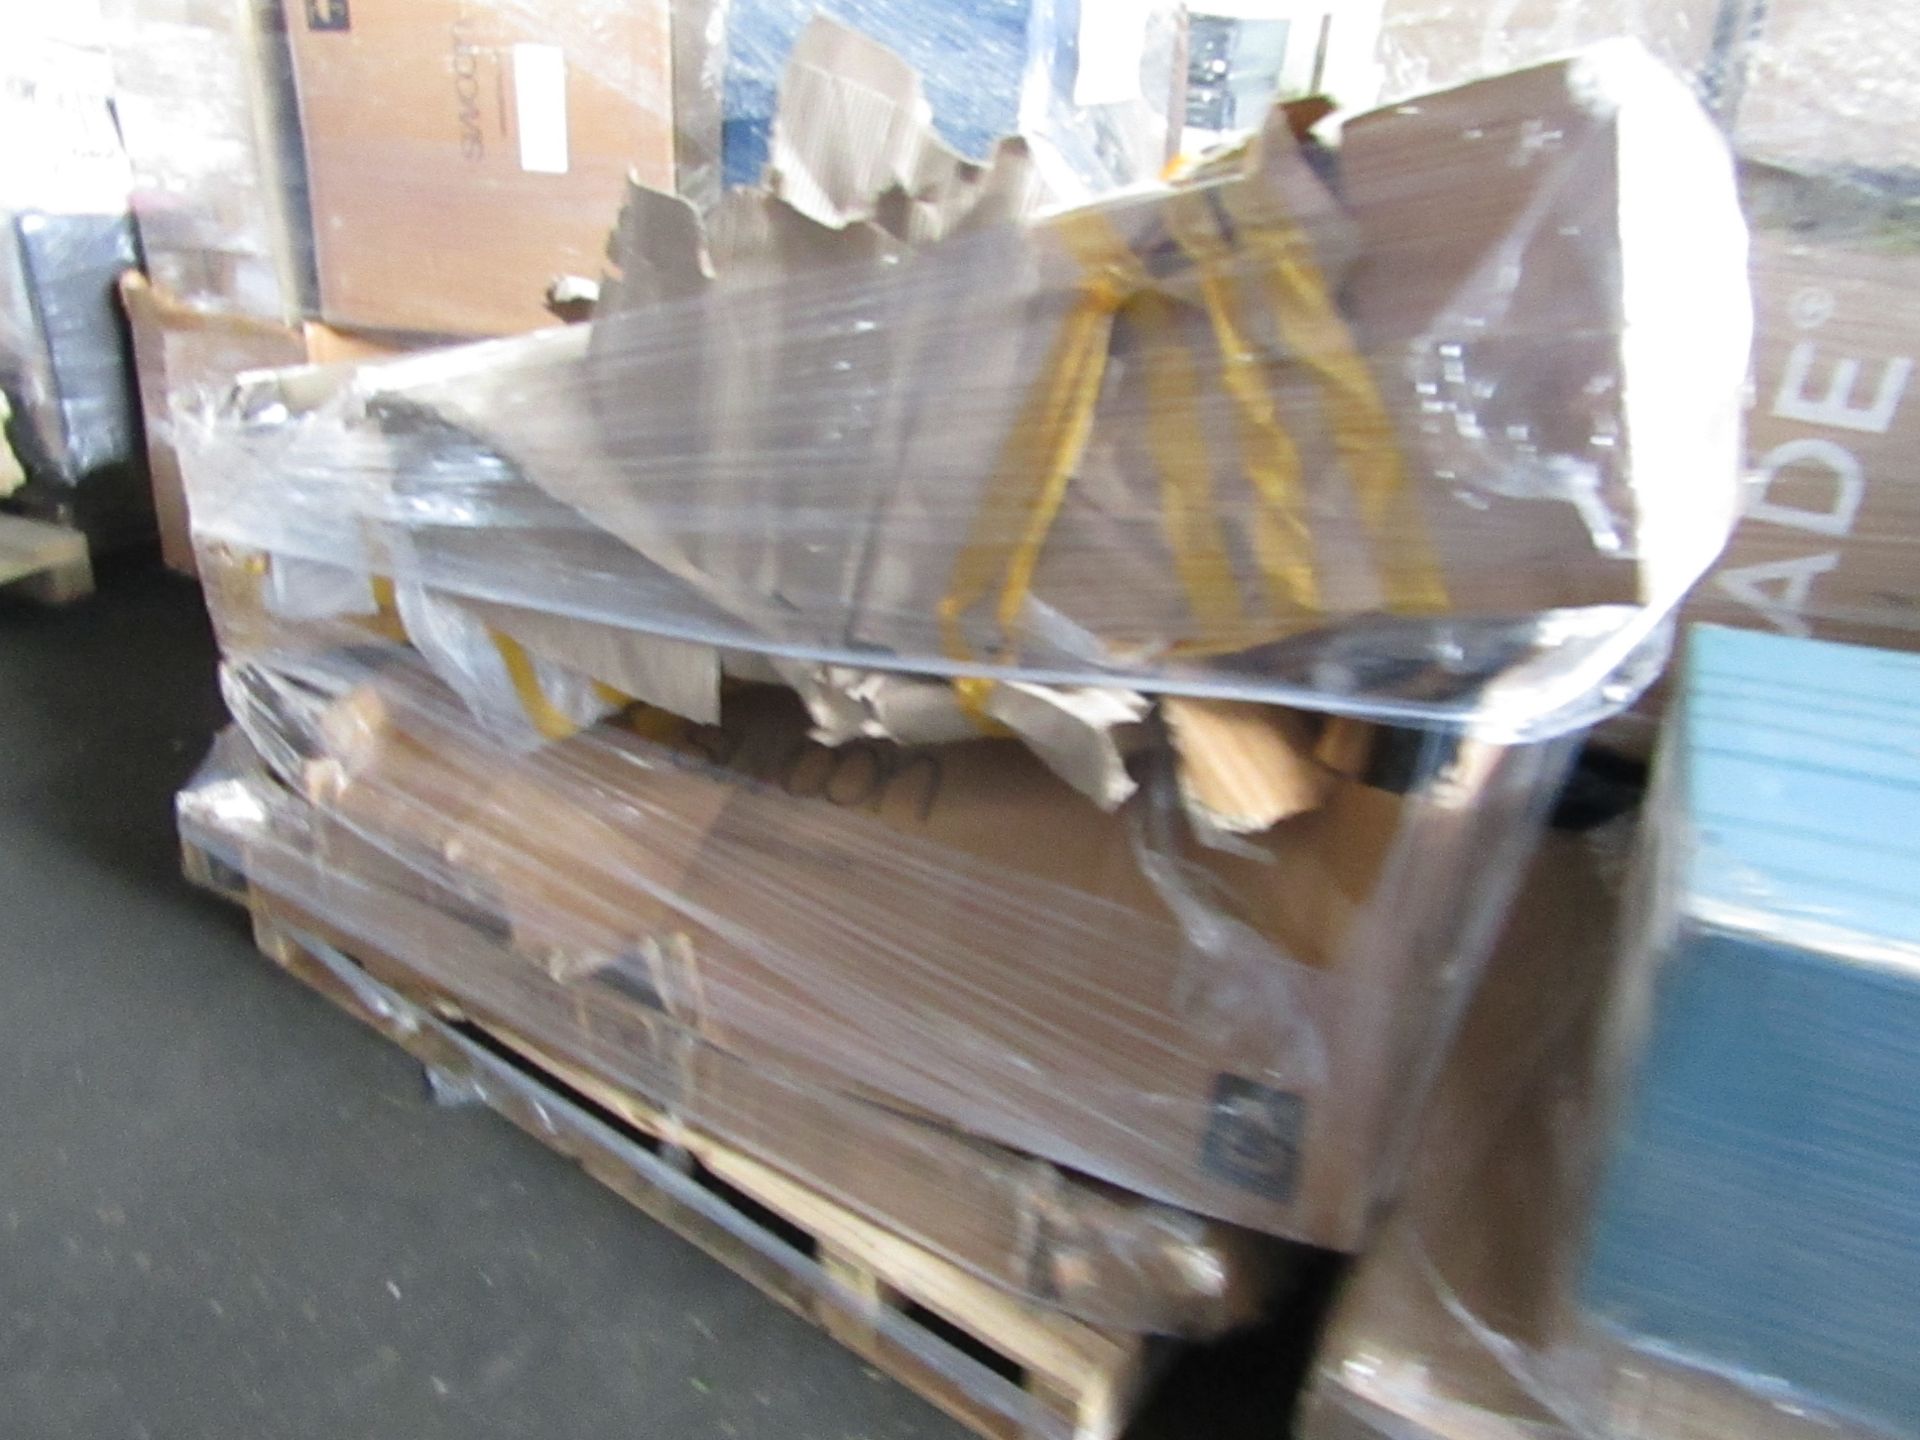 | 1X | PALLET OF FAULTY / MISSING PARTS / DAMAGED CUSTOMER RETURNS SWOON UNMANIFESTED | PALLET